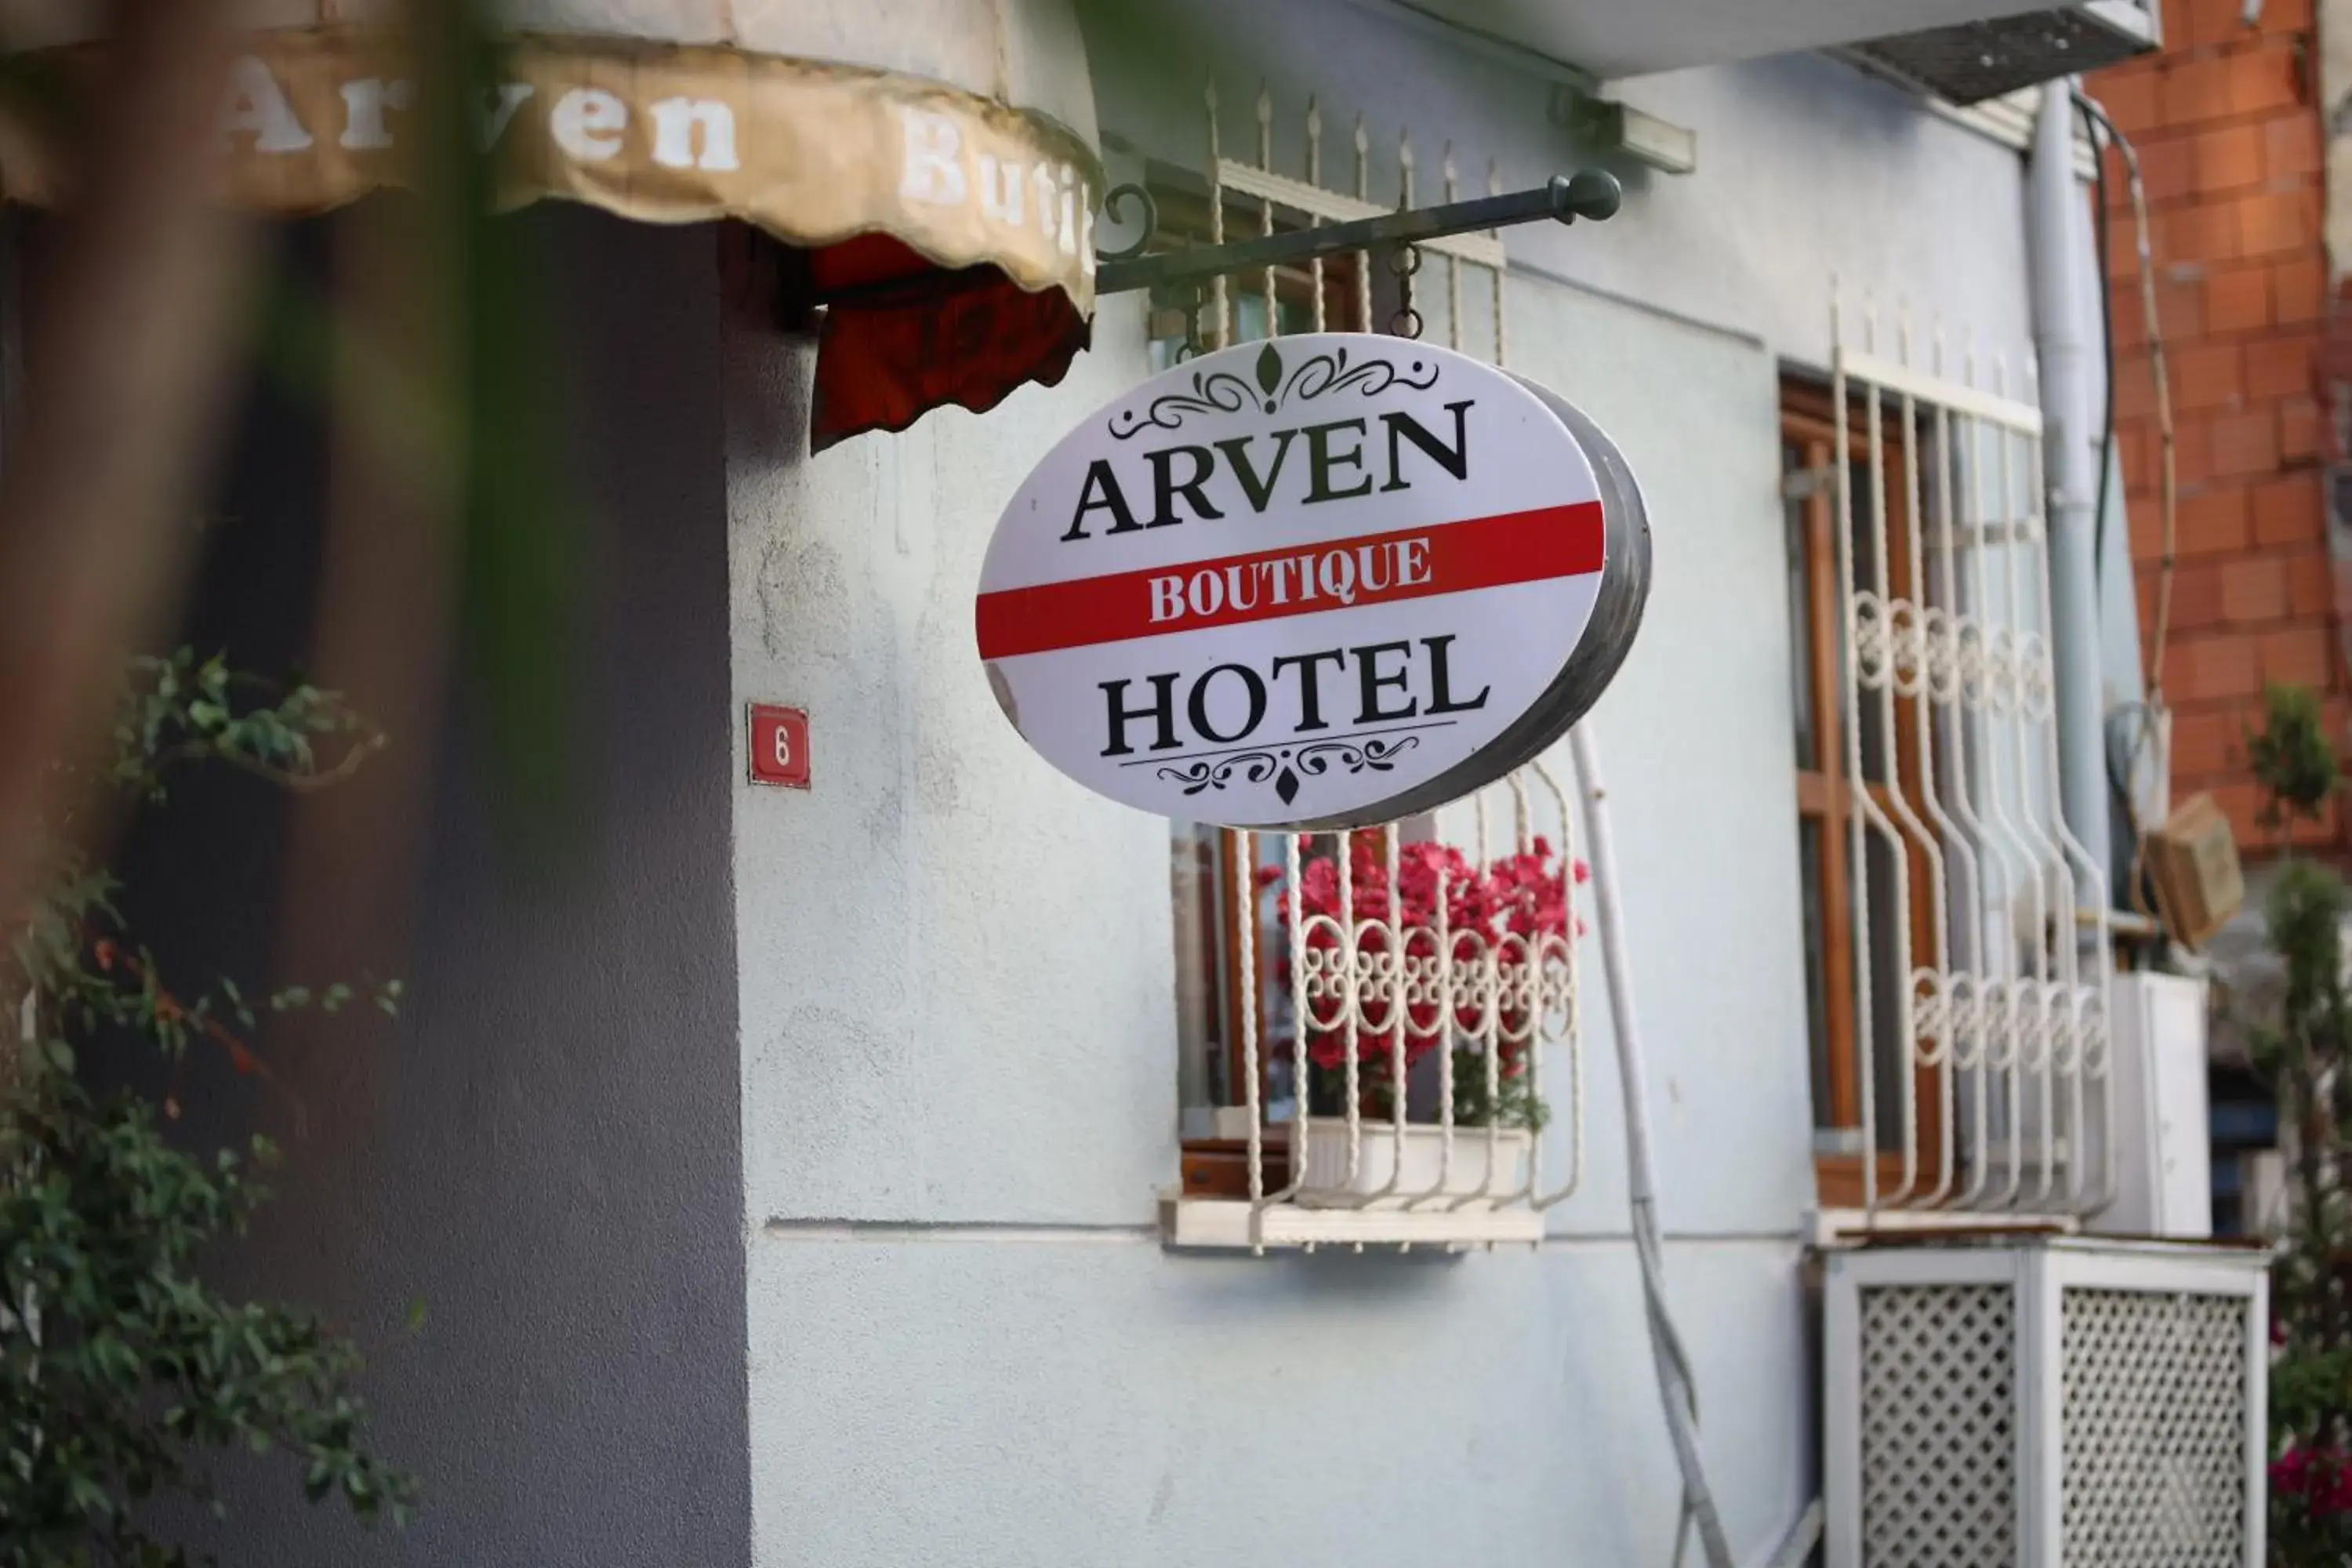 Property logo or sign in Arven Boutique Hotel